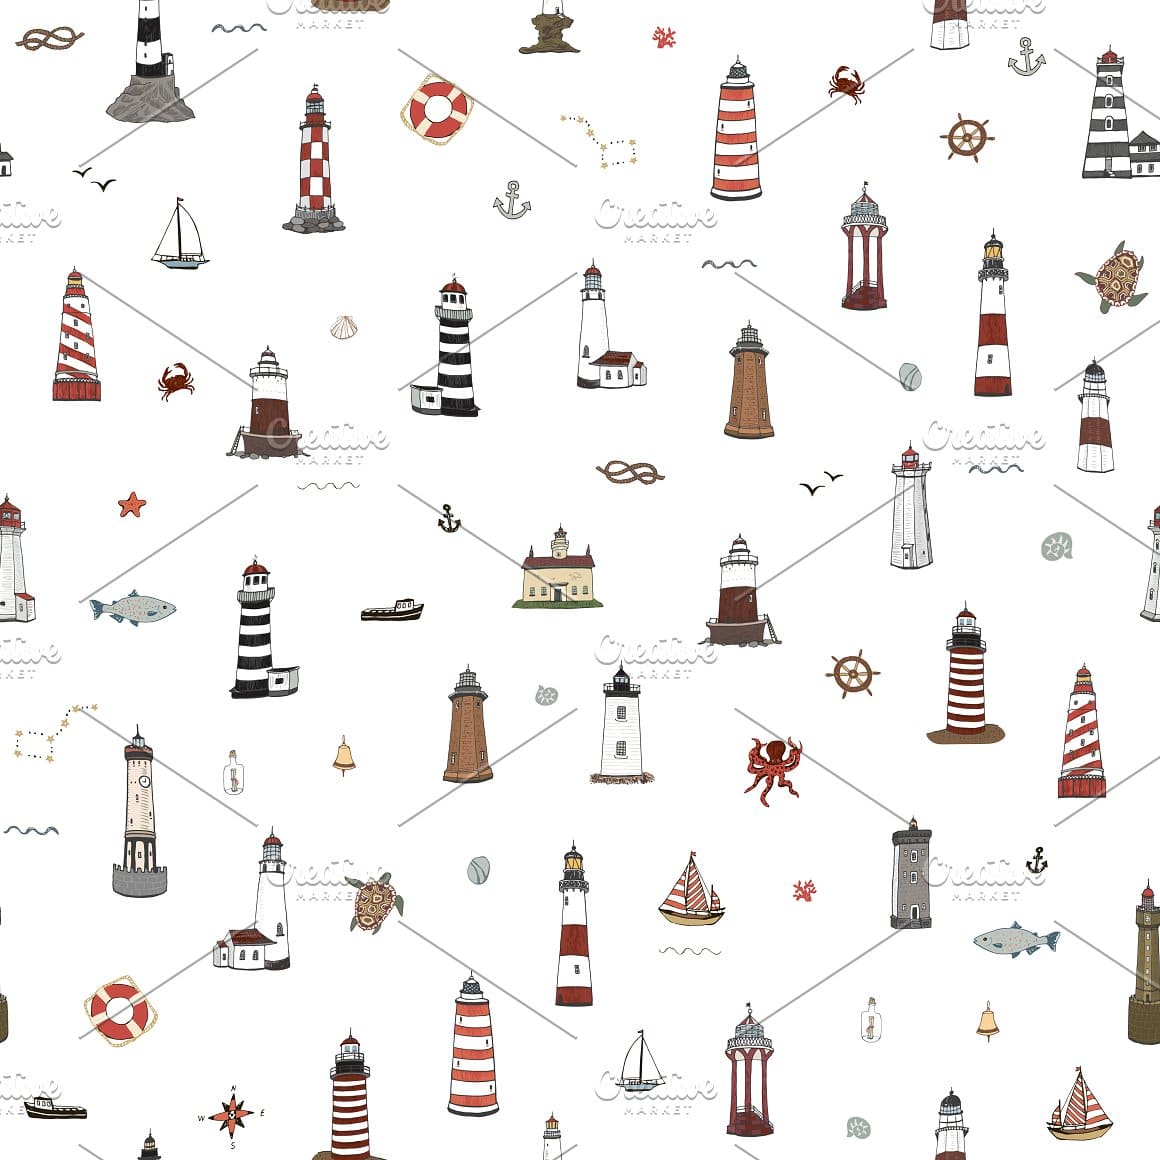 Lighthouses are decorated with colored stripes, diagonal stripes, and a checkerboard pattern.